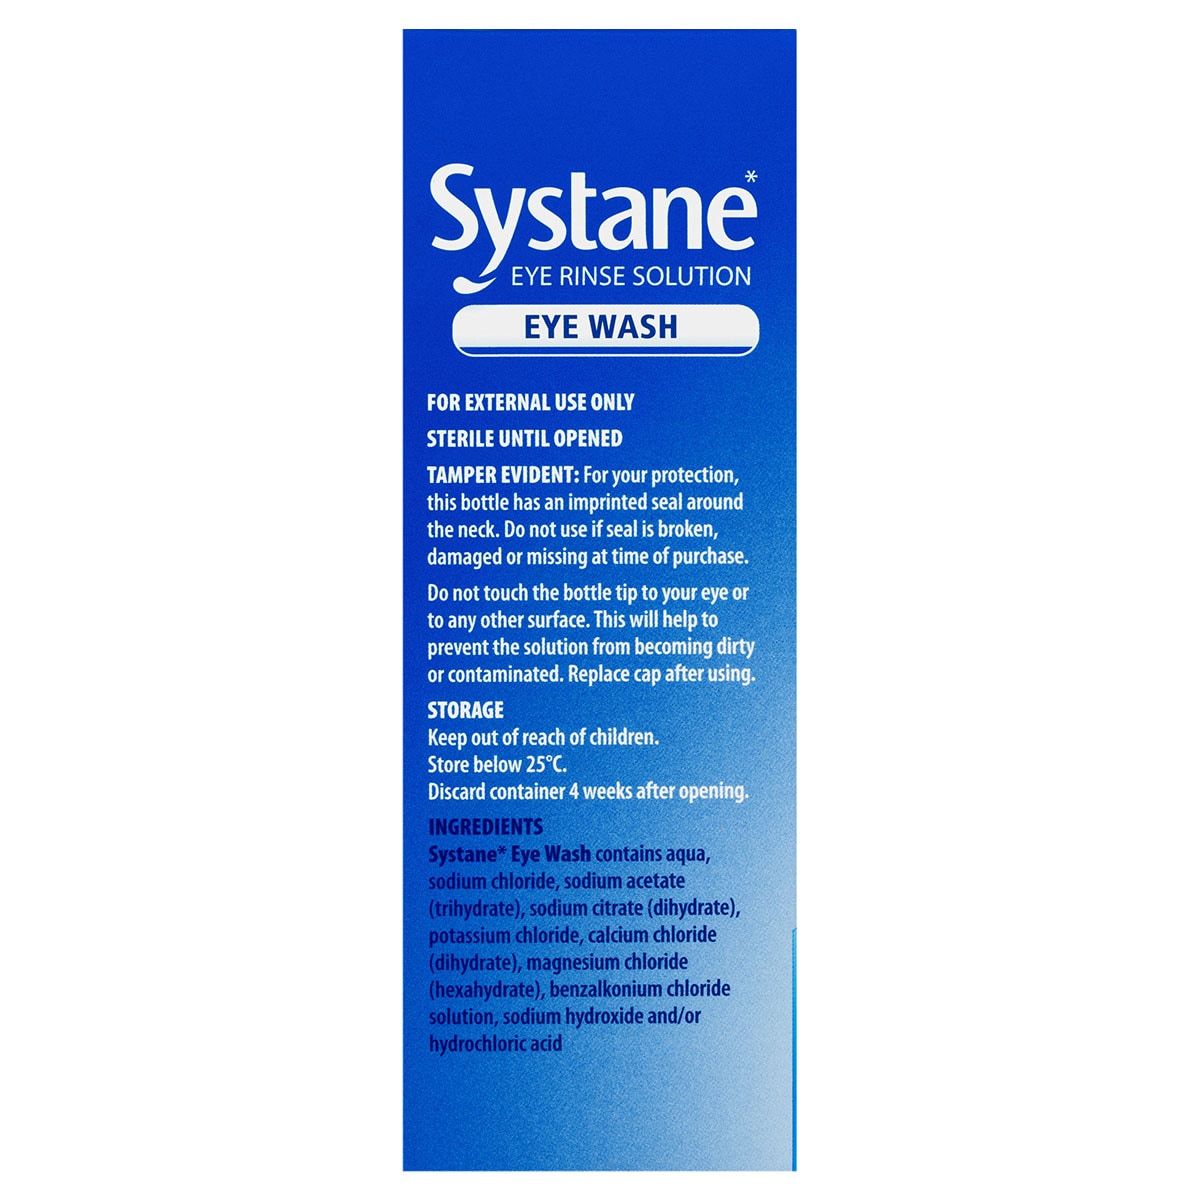 Systane Eye Wash Solution Gentle Cleansing for Irritated Eyes 120ml